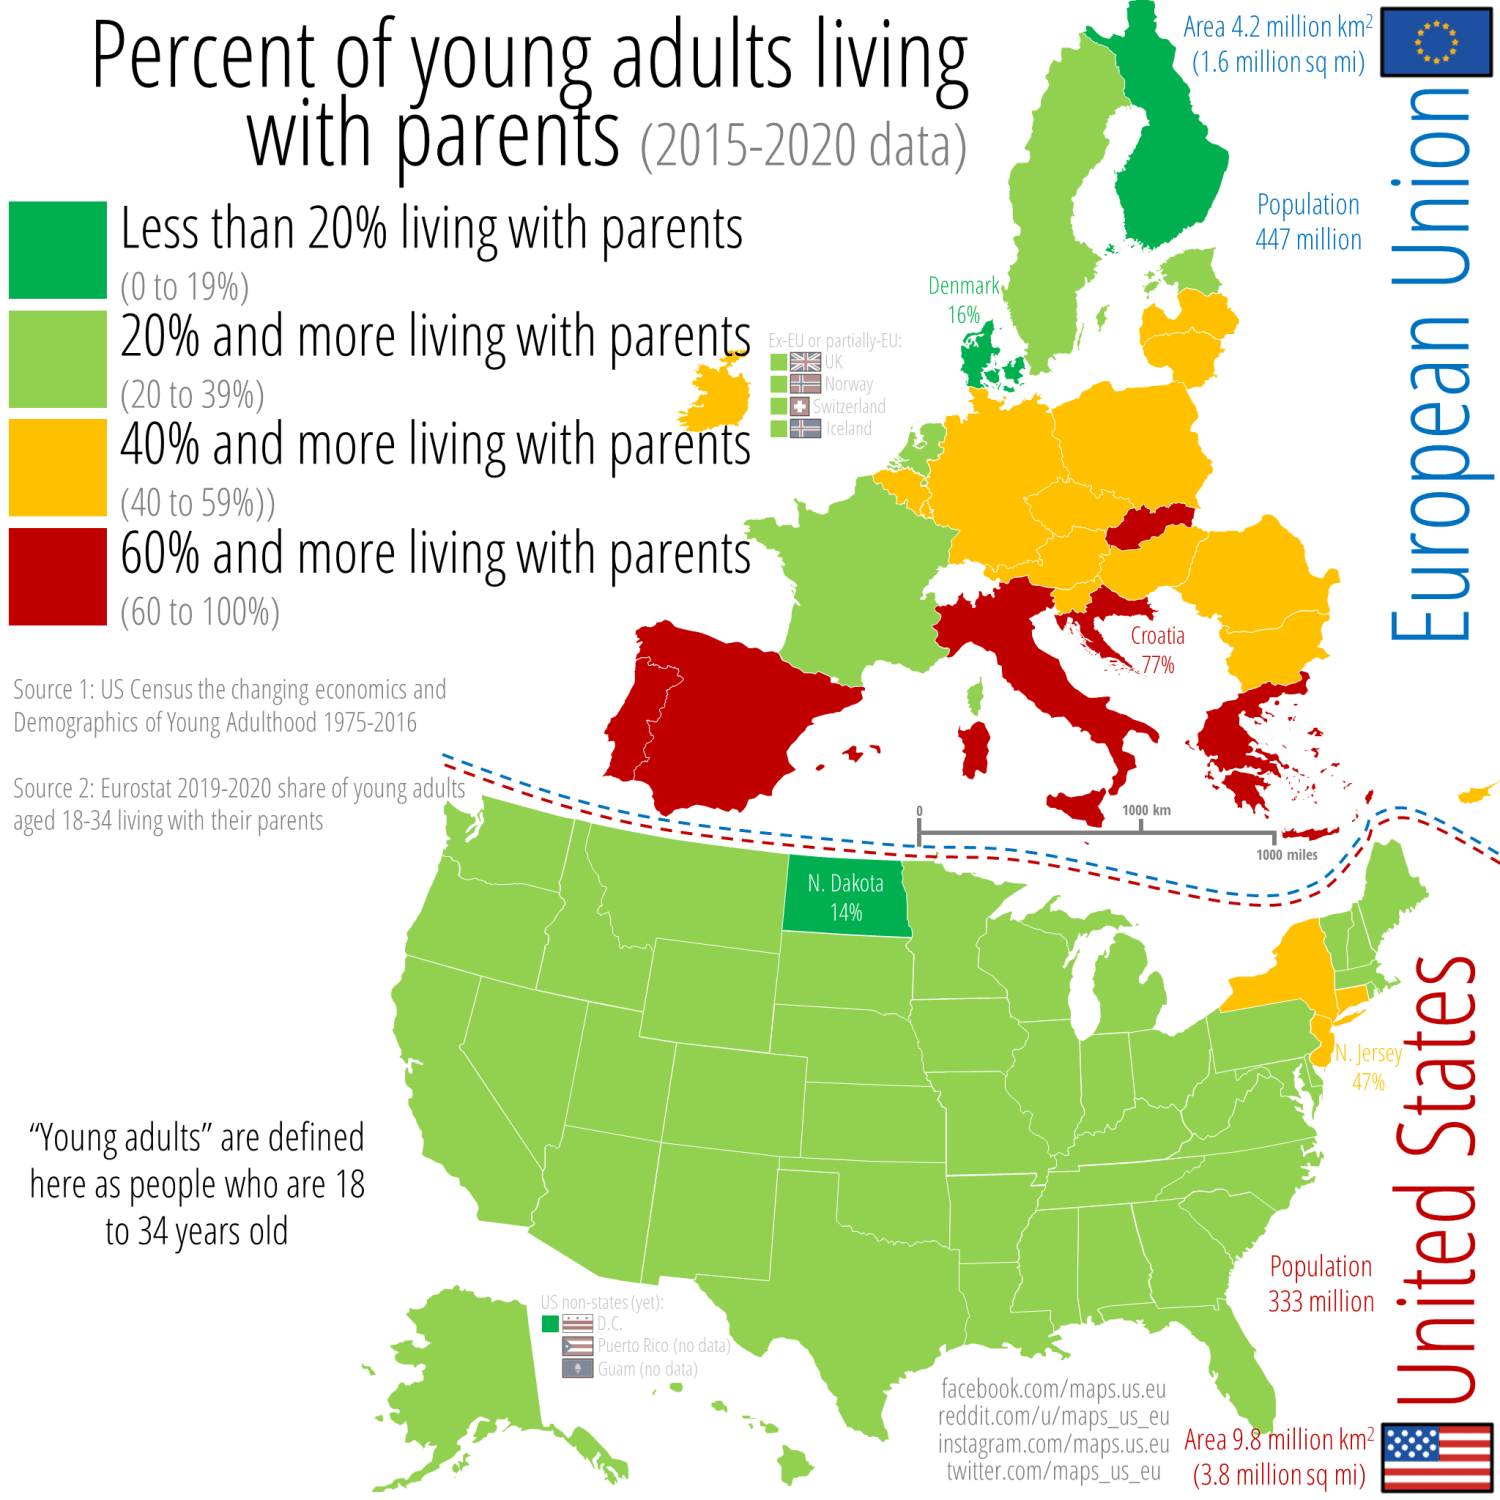 Percent of young adults living with parents across the US and the EU. 2015-2020 data